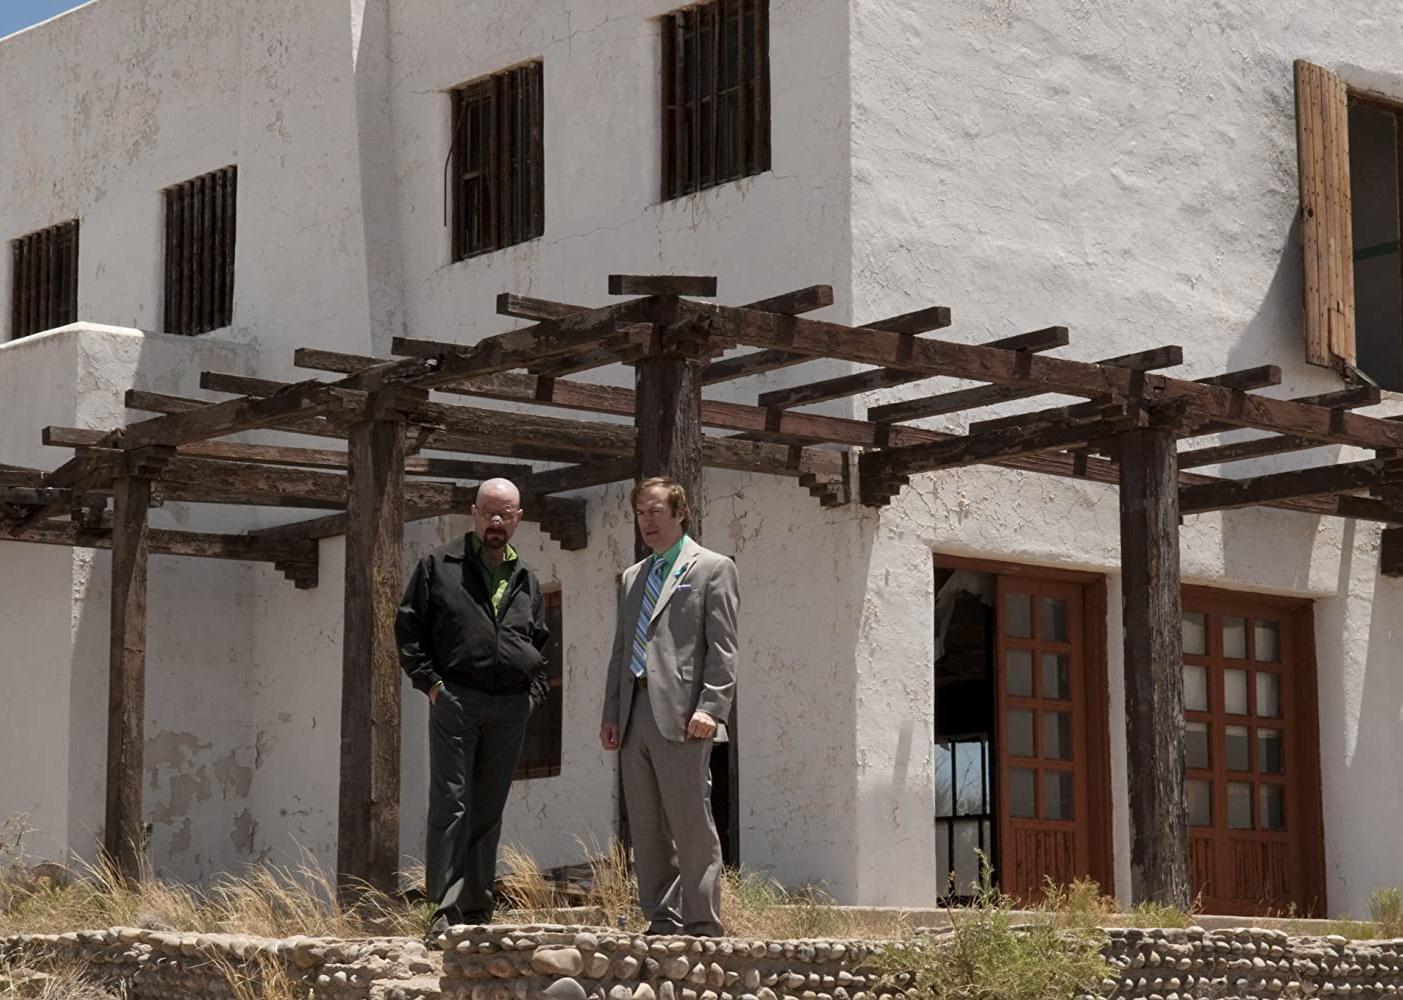 Bryan Cranston and Bob Odenkirk standing in front of a stucco building.